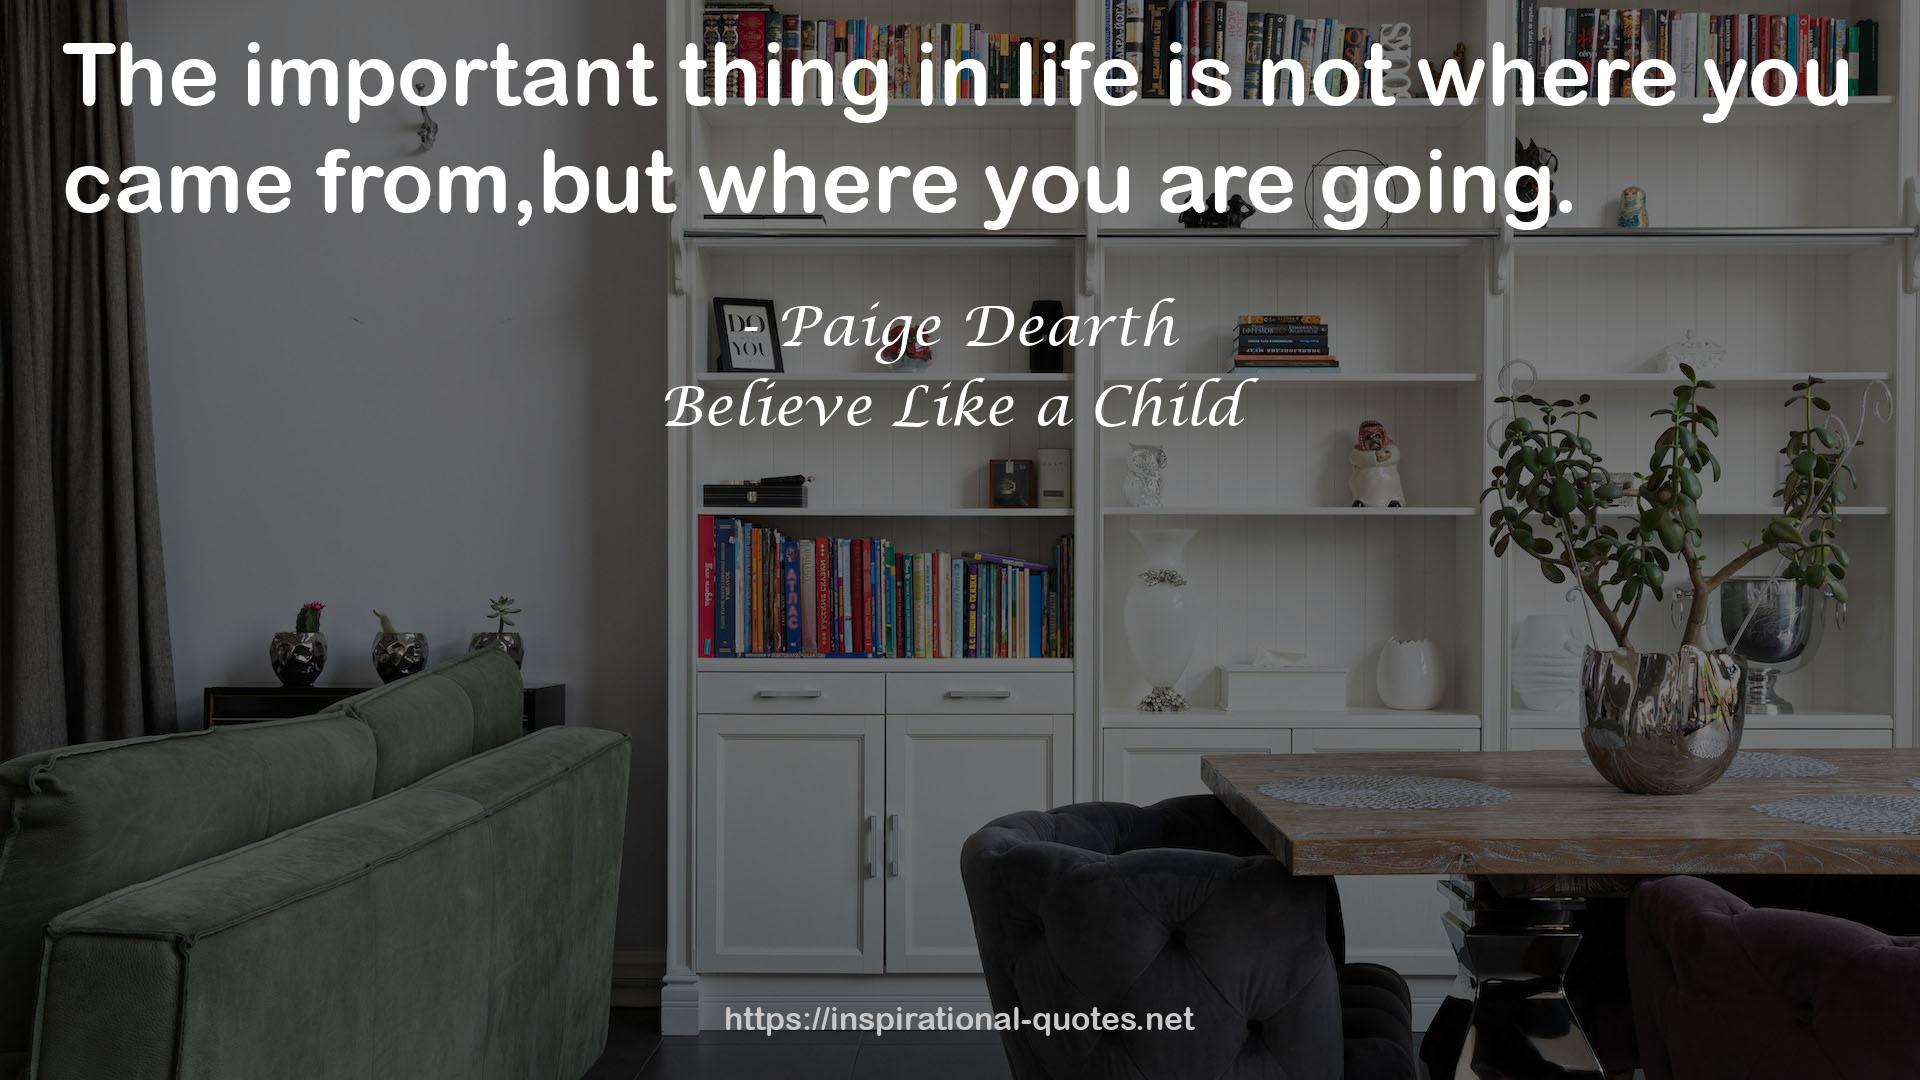 Believe Like a Child QUOTES